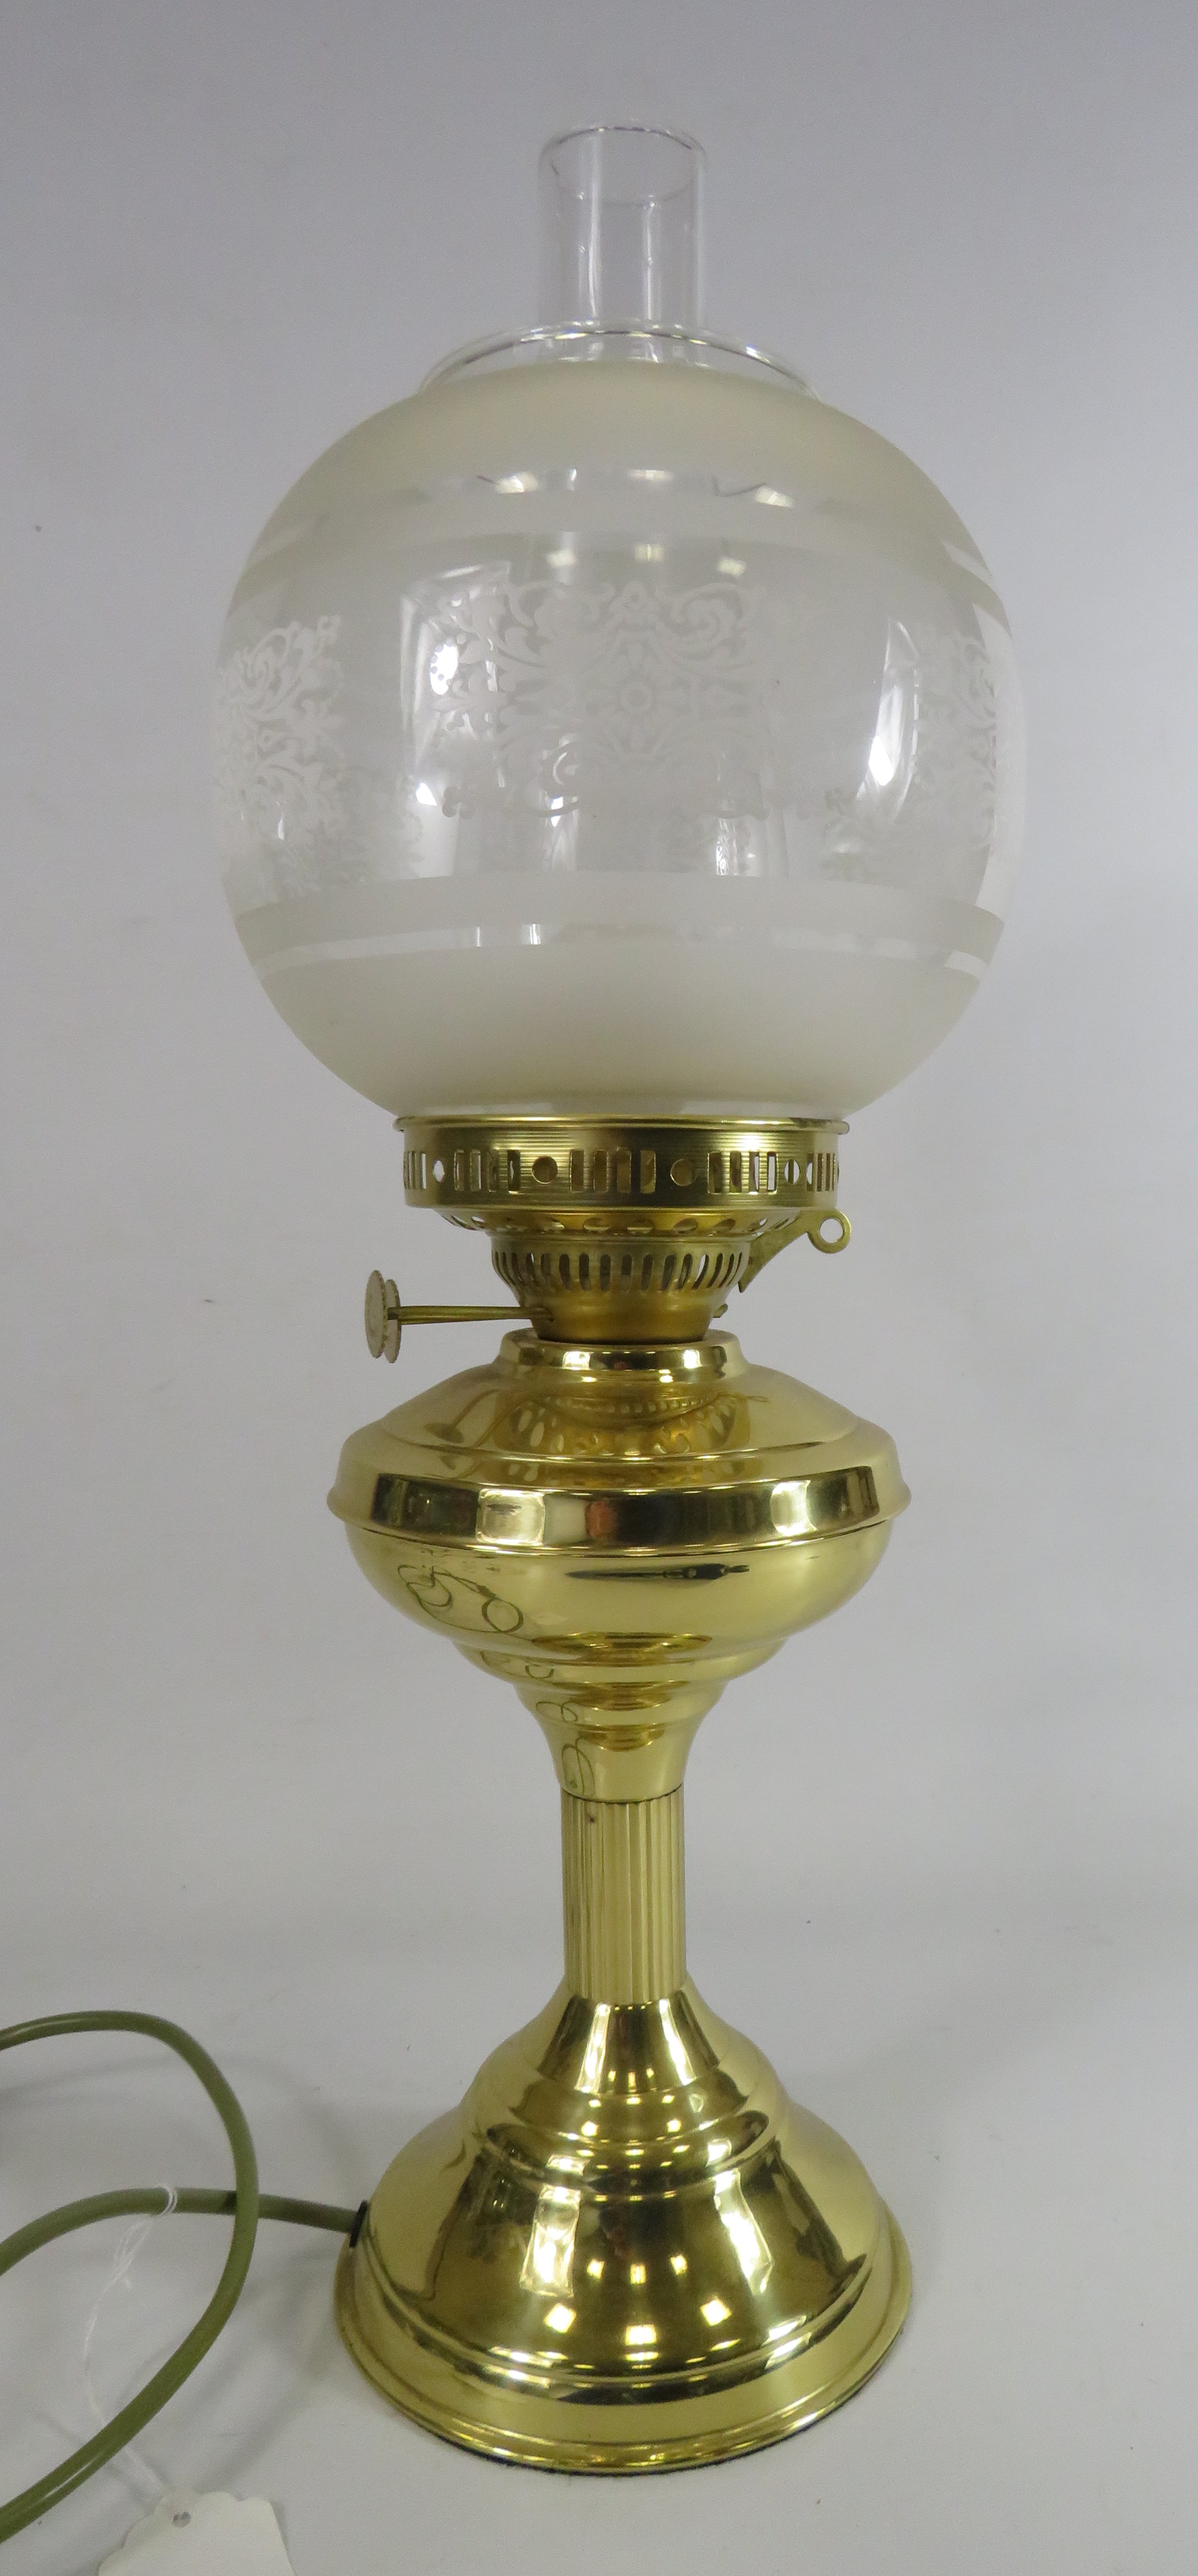 Nanticalia oil lamp converted to electric with globe shade. - Image 2 of 4